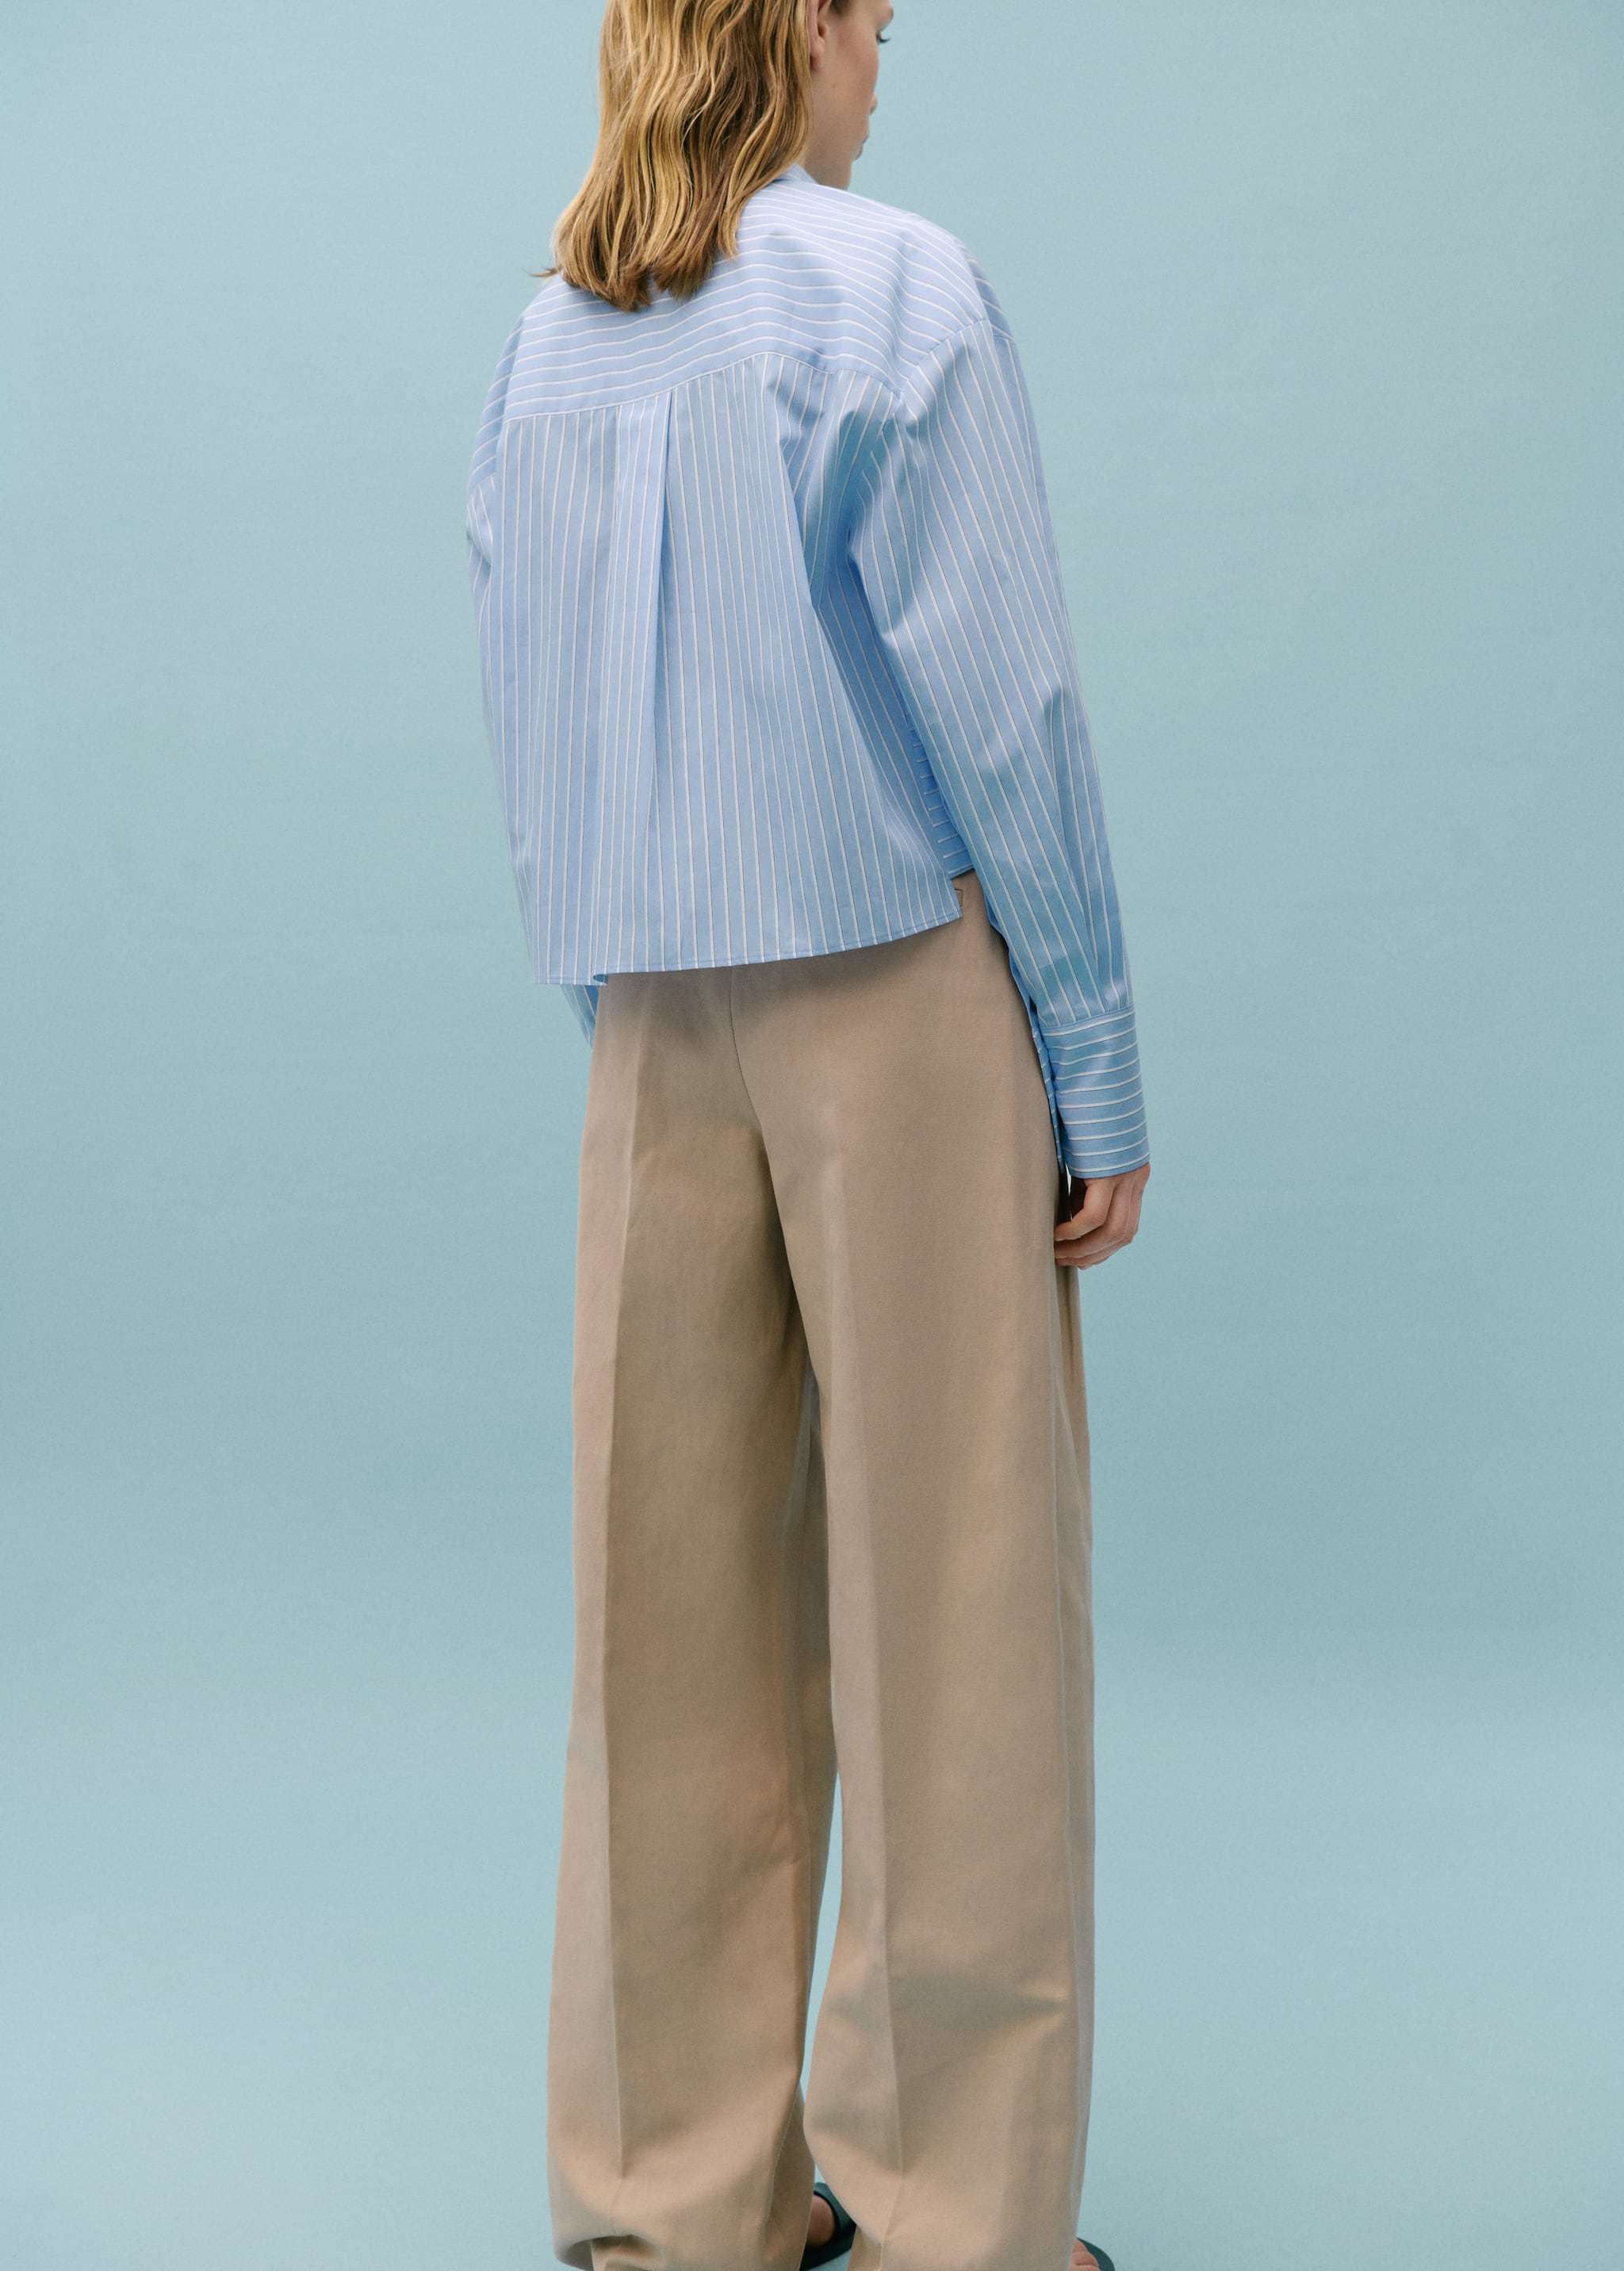 Pleat straight trousers - Details of the article 1